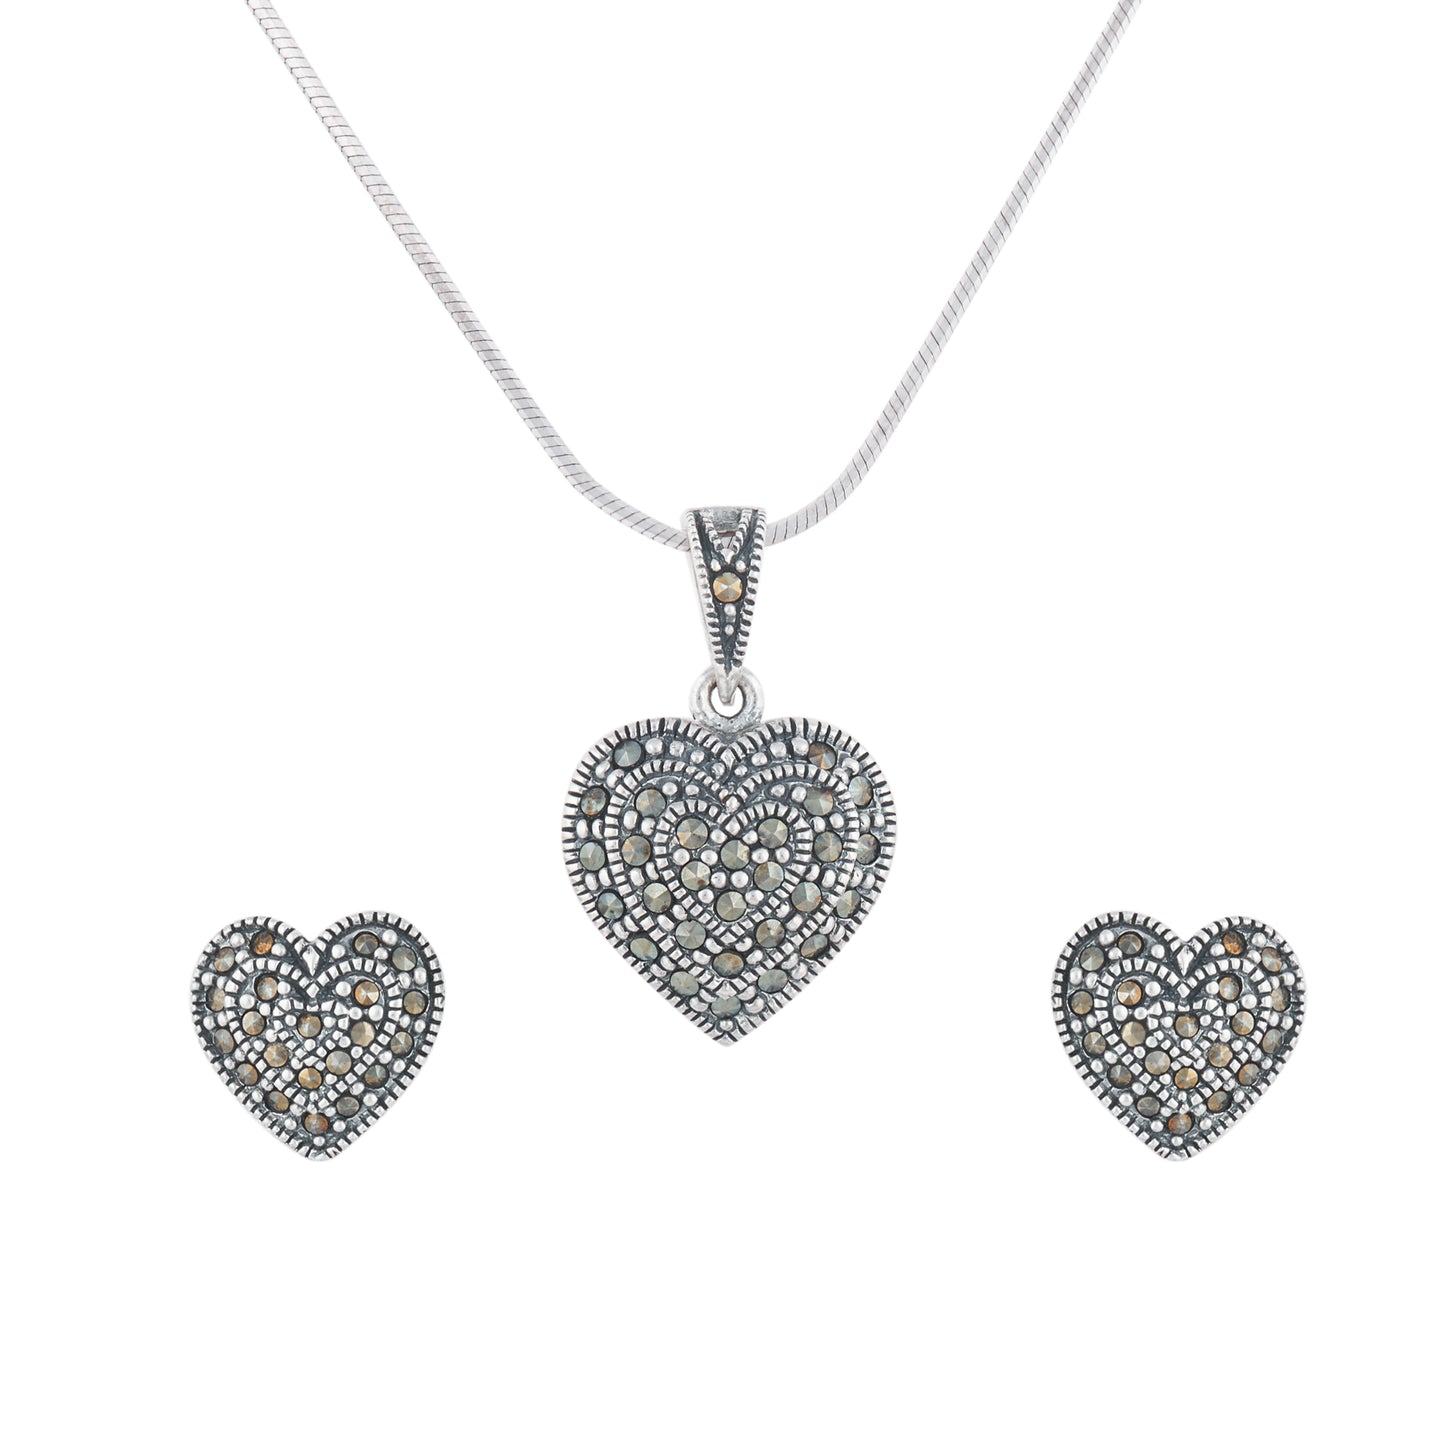 Antique Silver Crystal Heart Necklace Set